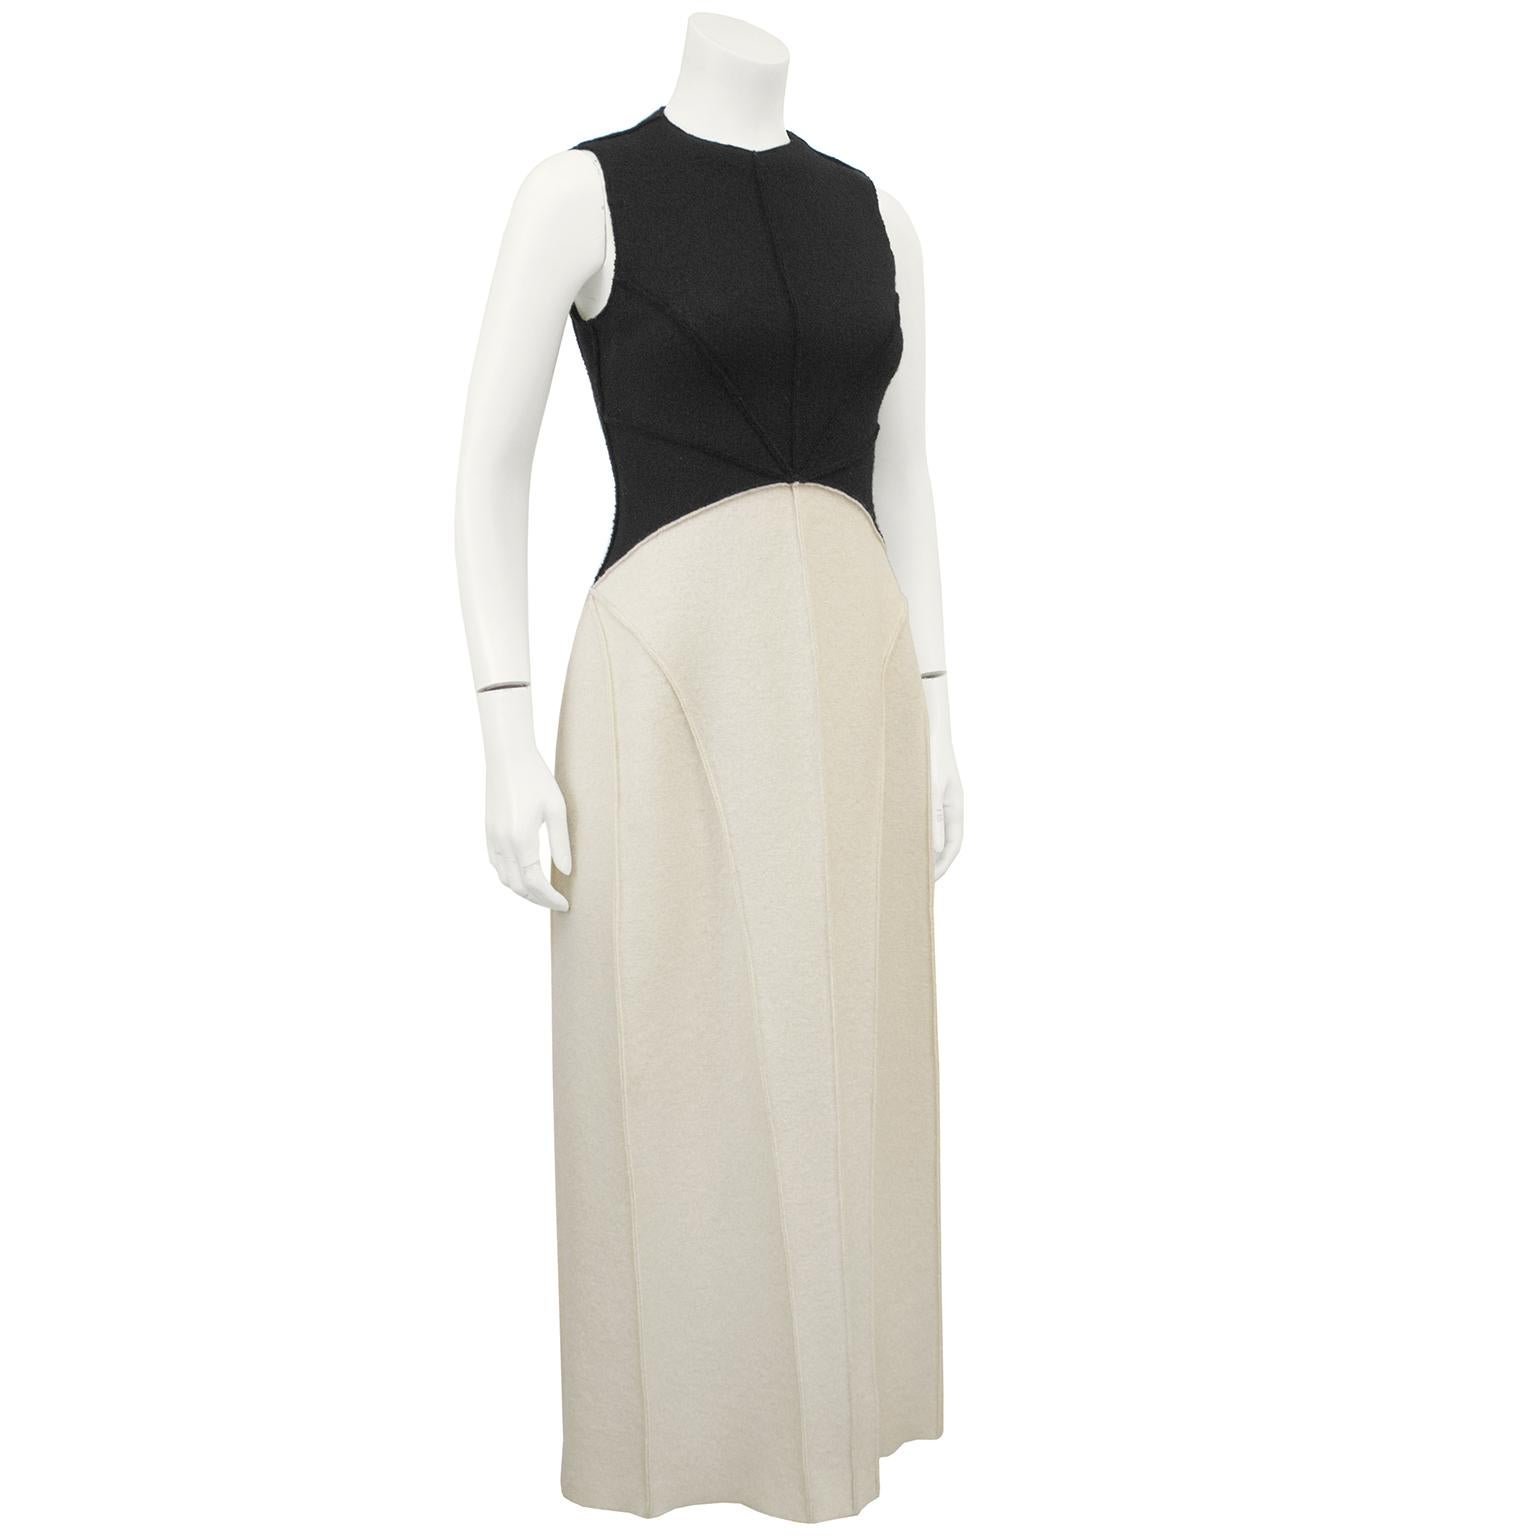 Beautiful Chanel black and cream felted wool maxi dress from Fall 1999 collection. The bottom of the dress is cream while the top is black with a curved seam accentuating the waist, higher in the front and lower in the back. Seams down the front and